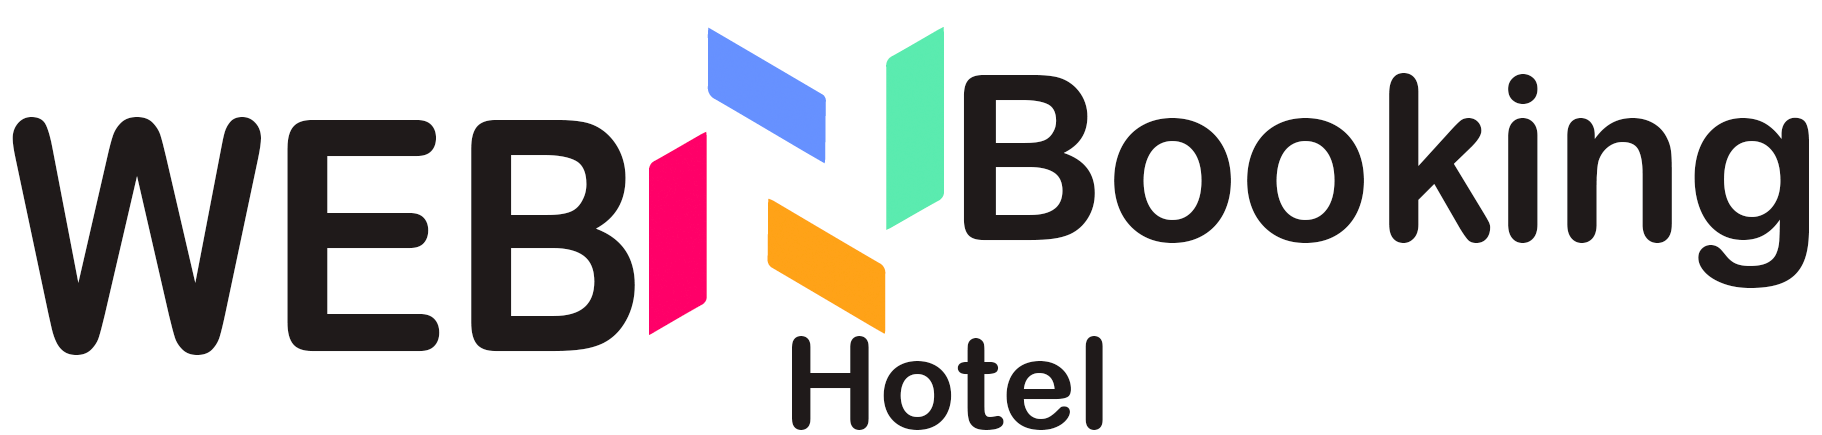 A better deal on your next hotel, motel or accommodation booking.